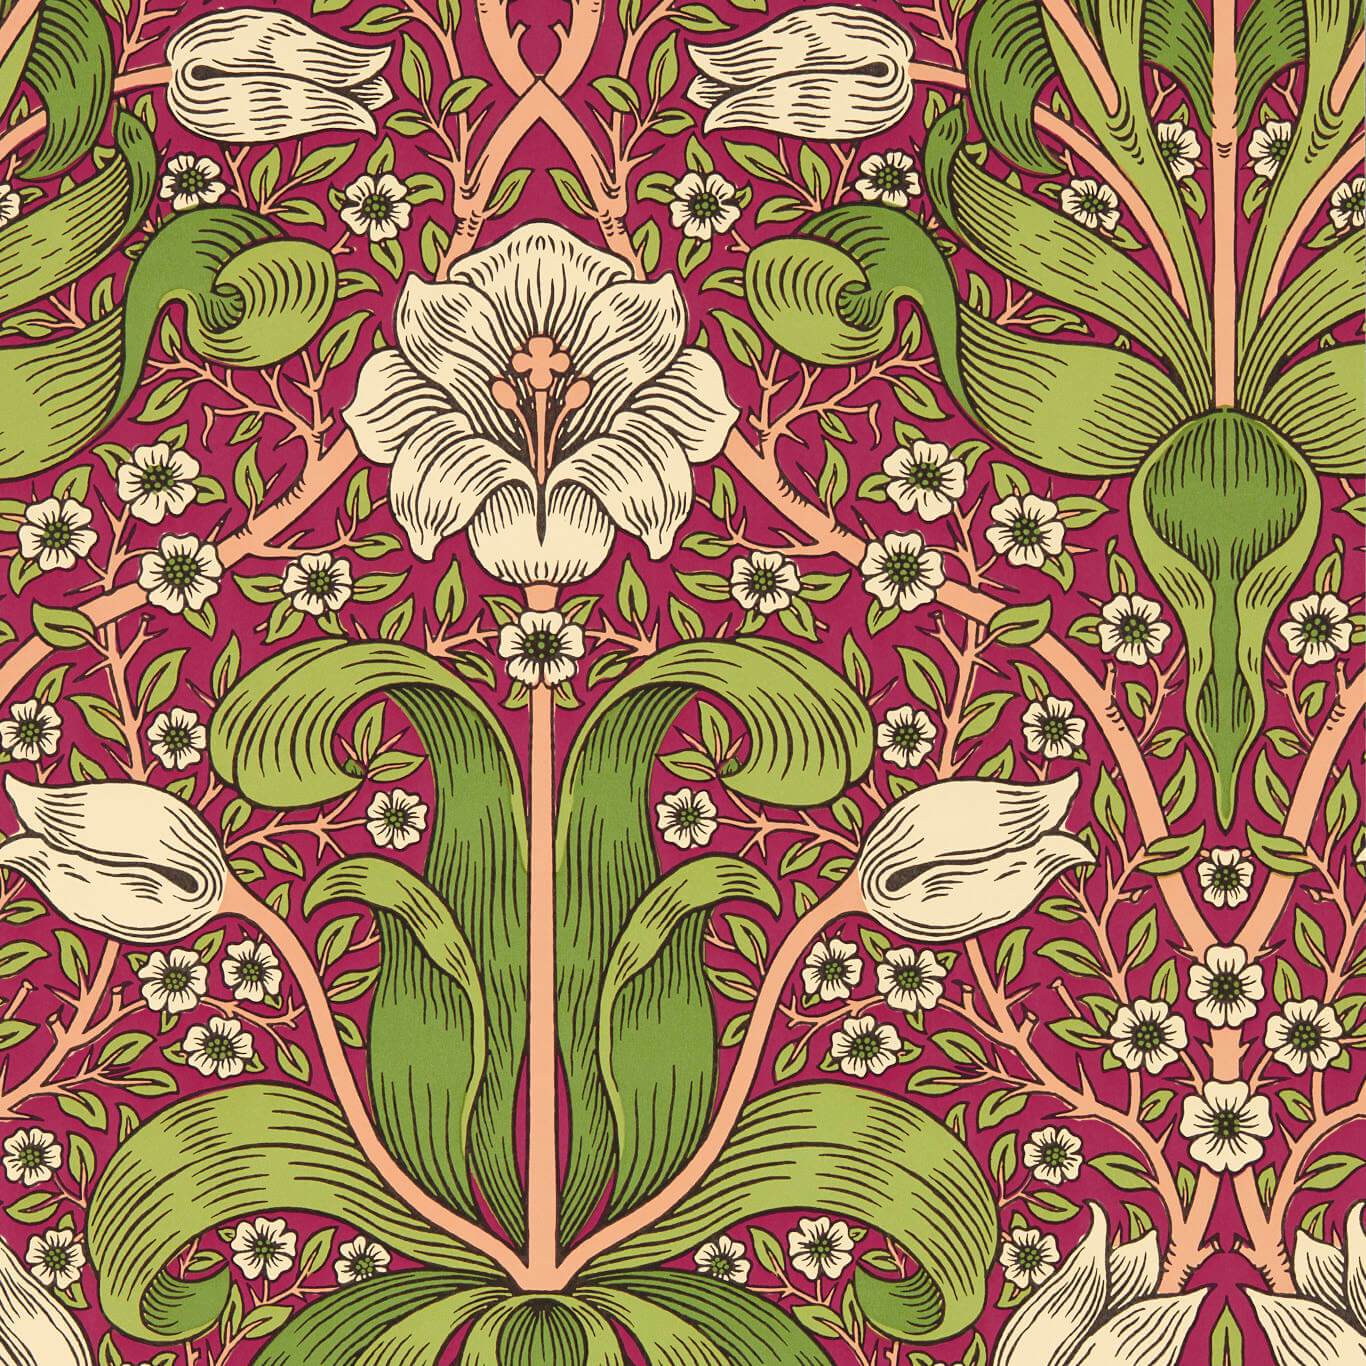 Spring Thicket Maraschino Cherry Wallpaper MVOW217337 by Morris & Co